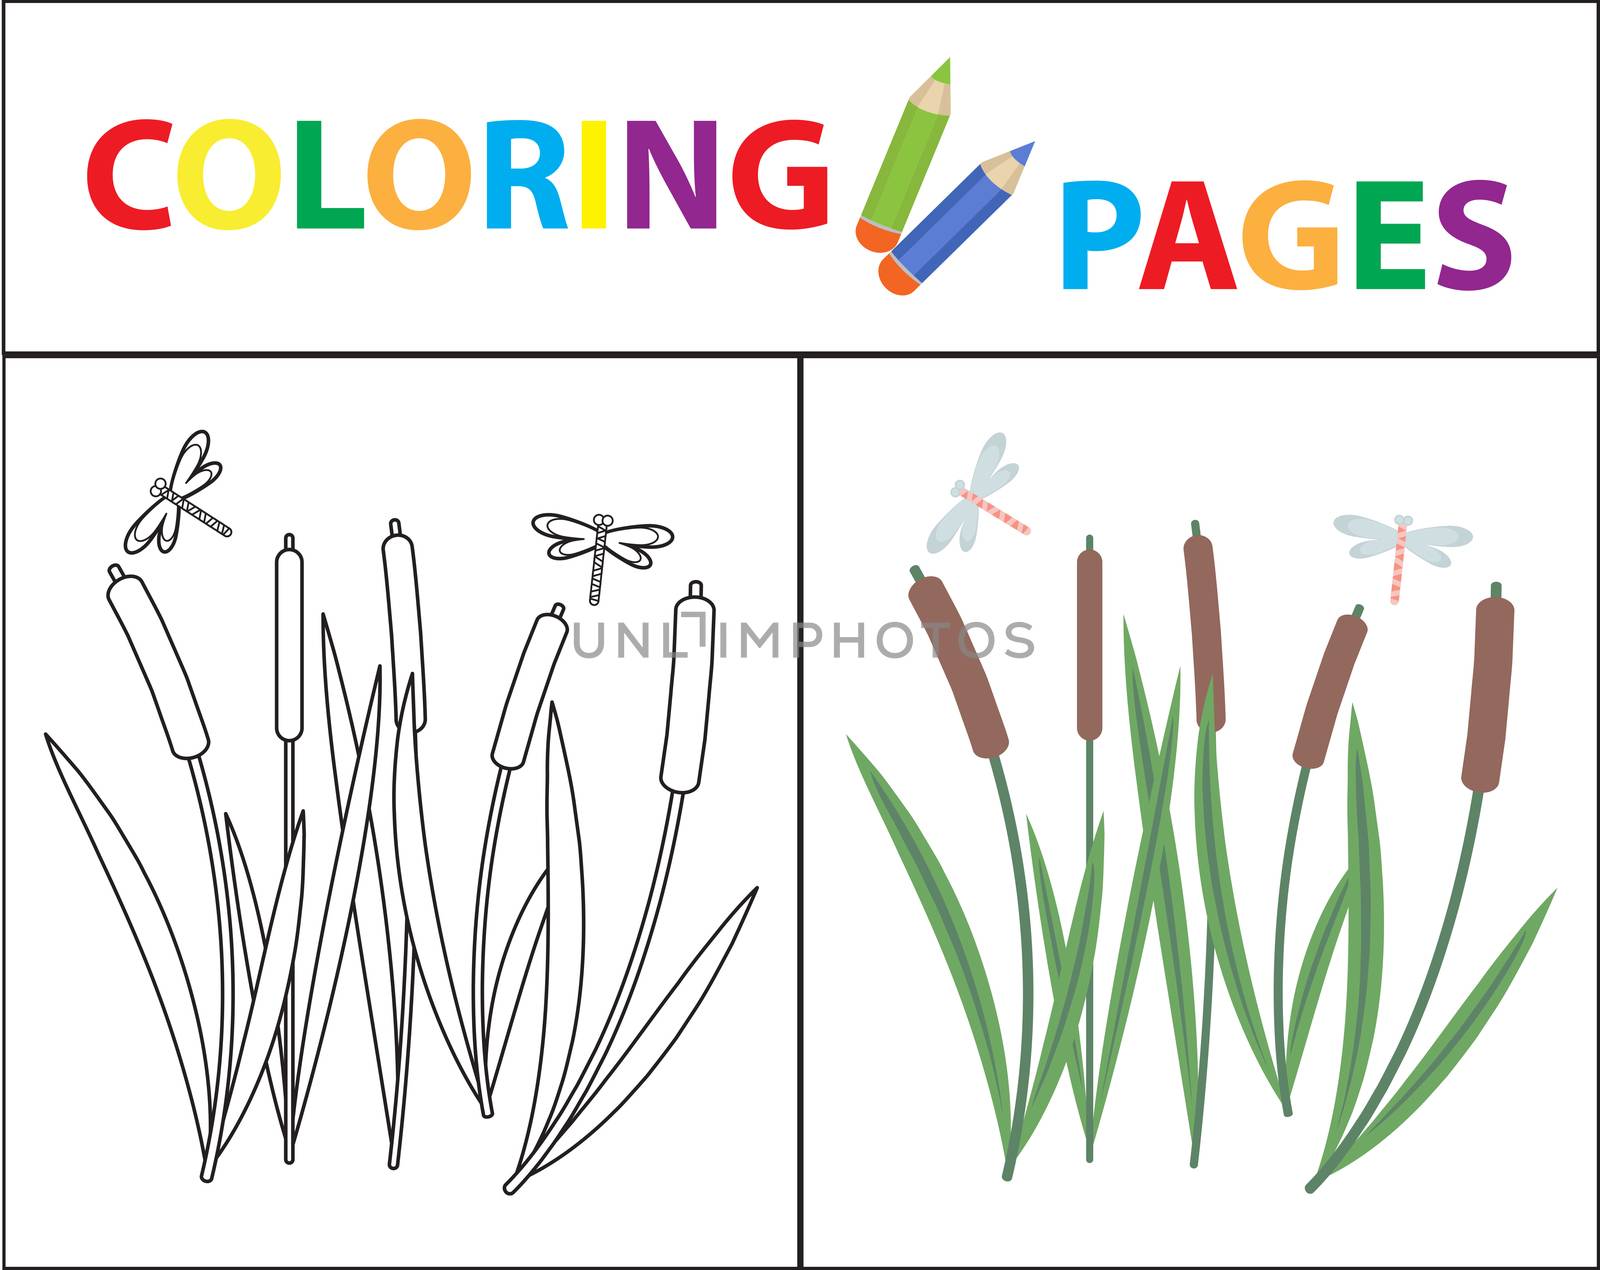 Coloring book page for kids. Reeds and dragonflies. Sketch outline and color version. Childrens education. illustration. by lucia_fox